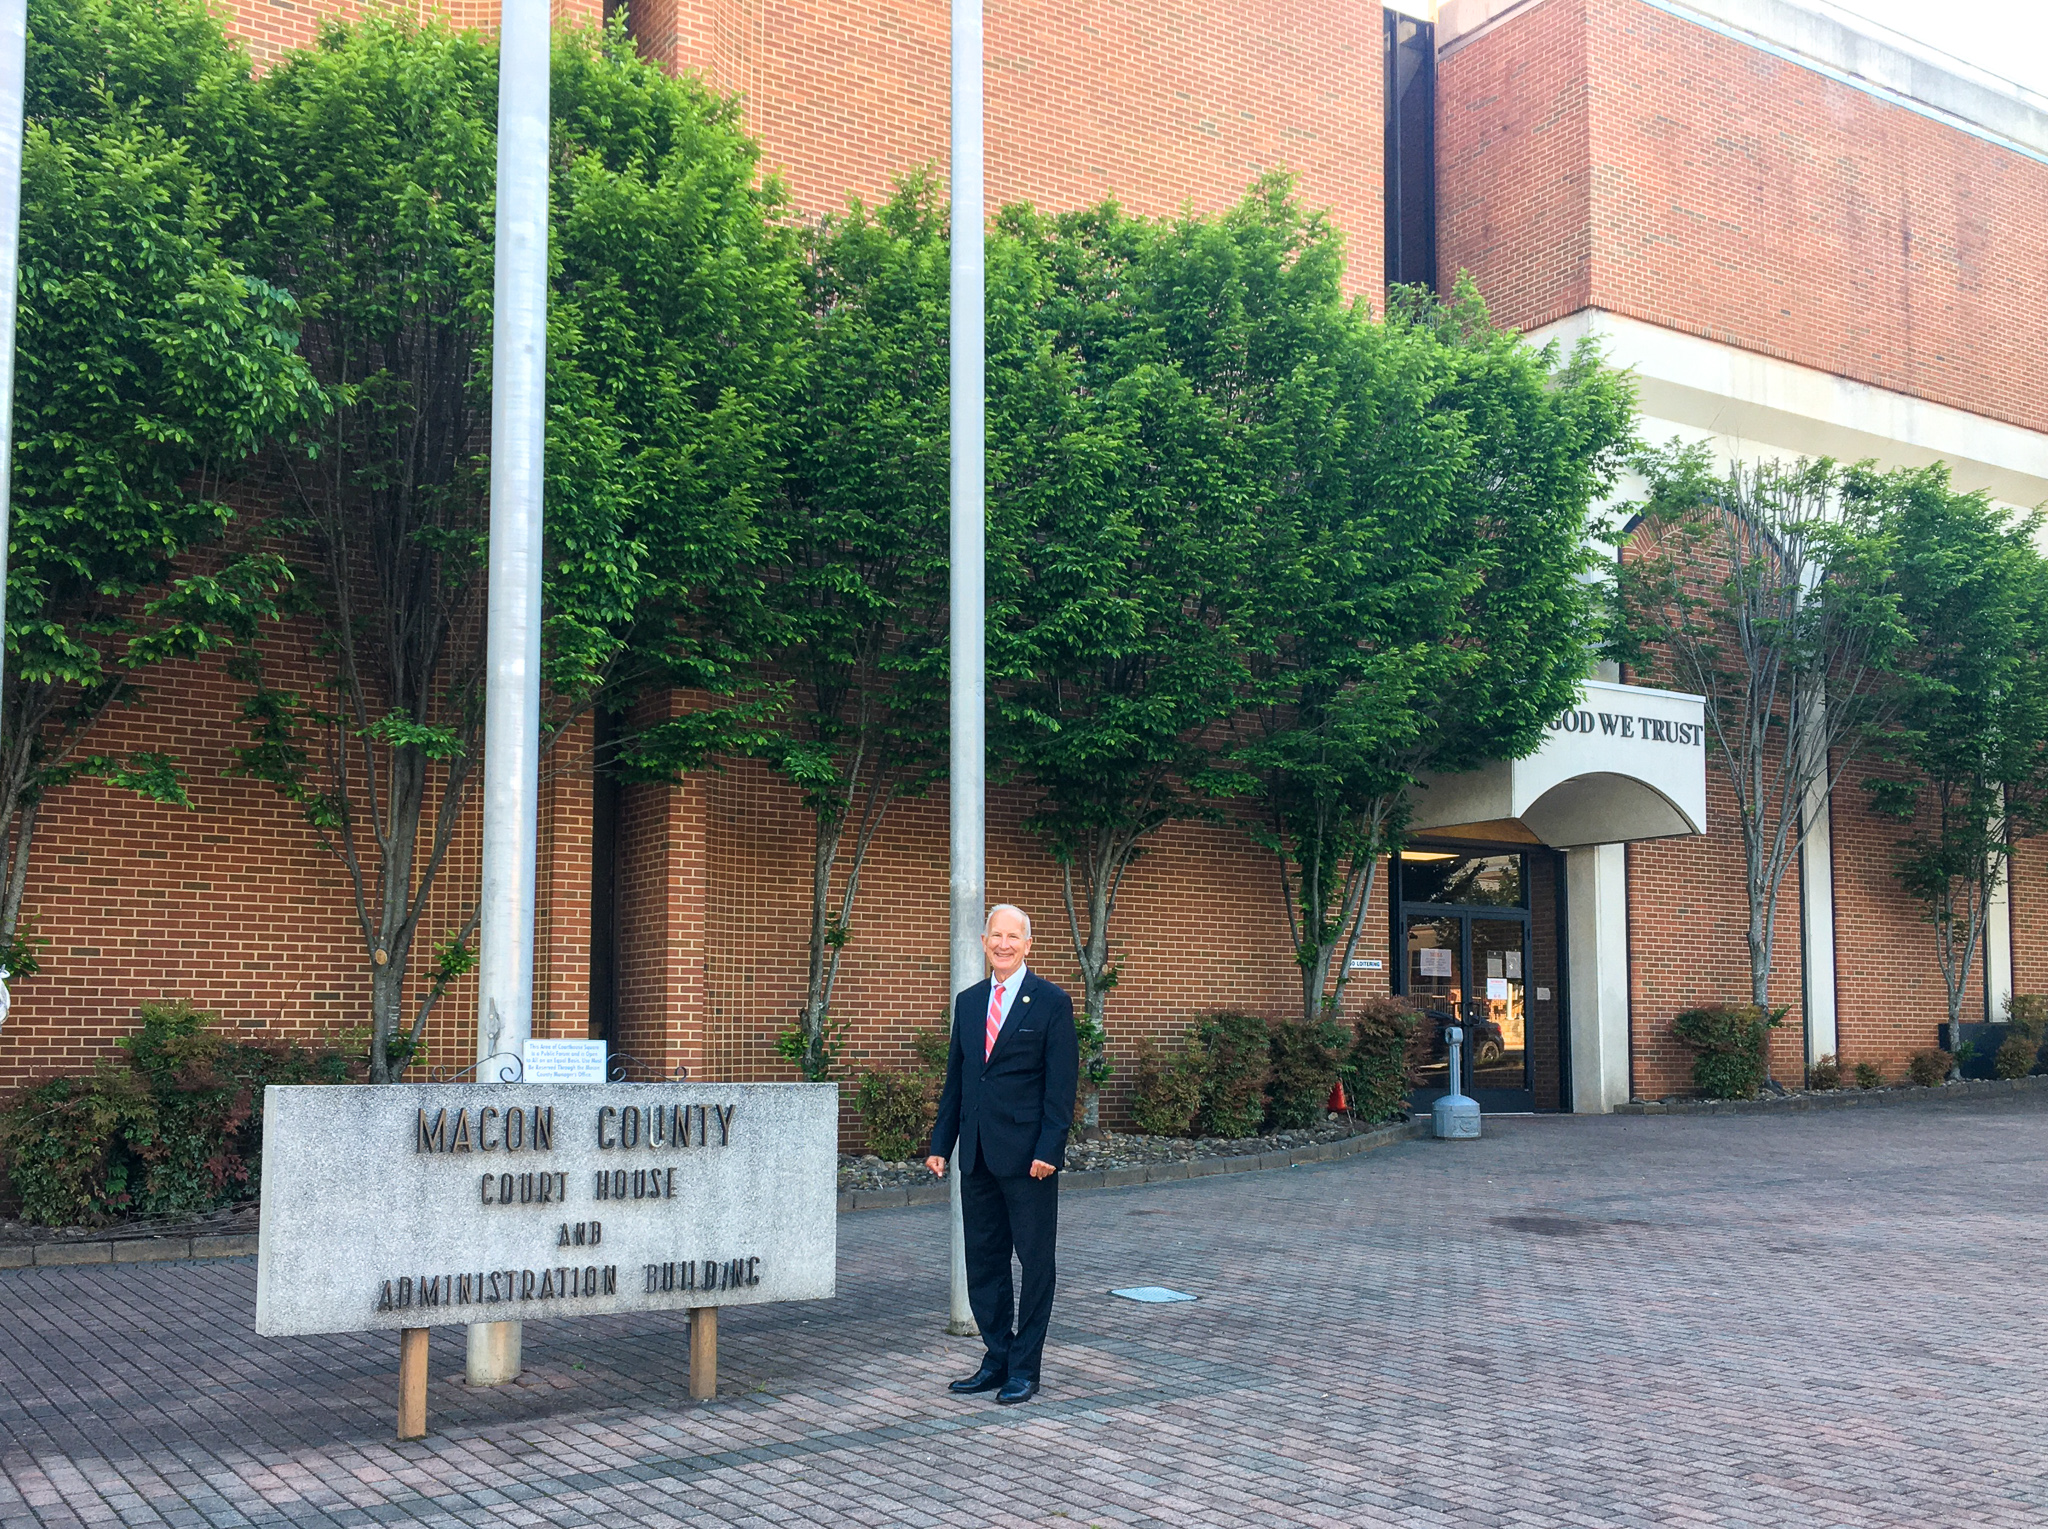 Chief Justice Newby in Front of the Macon County Courthouse